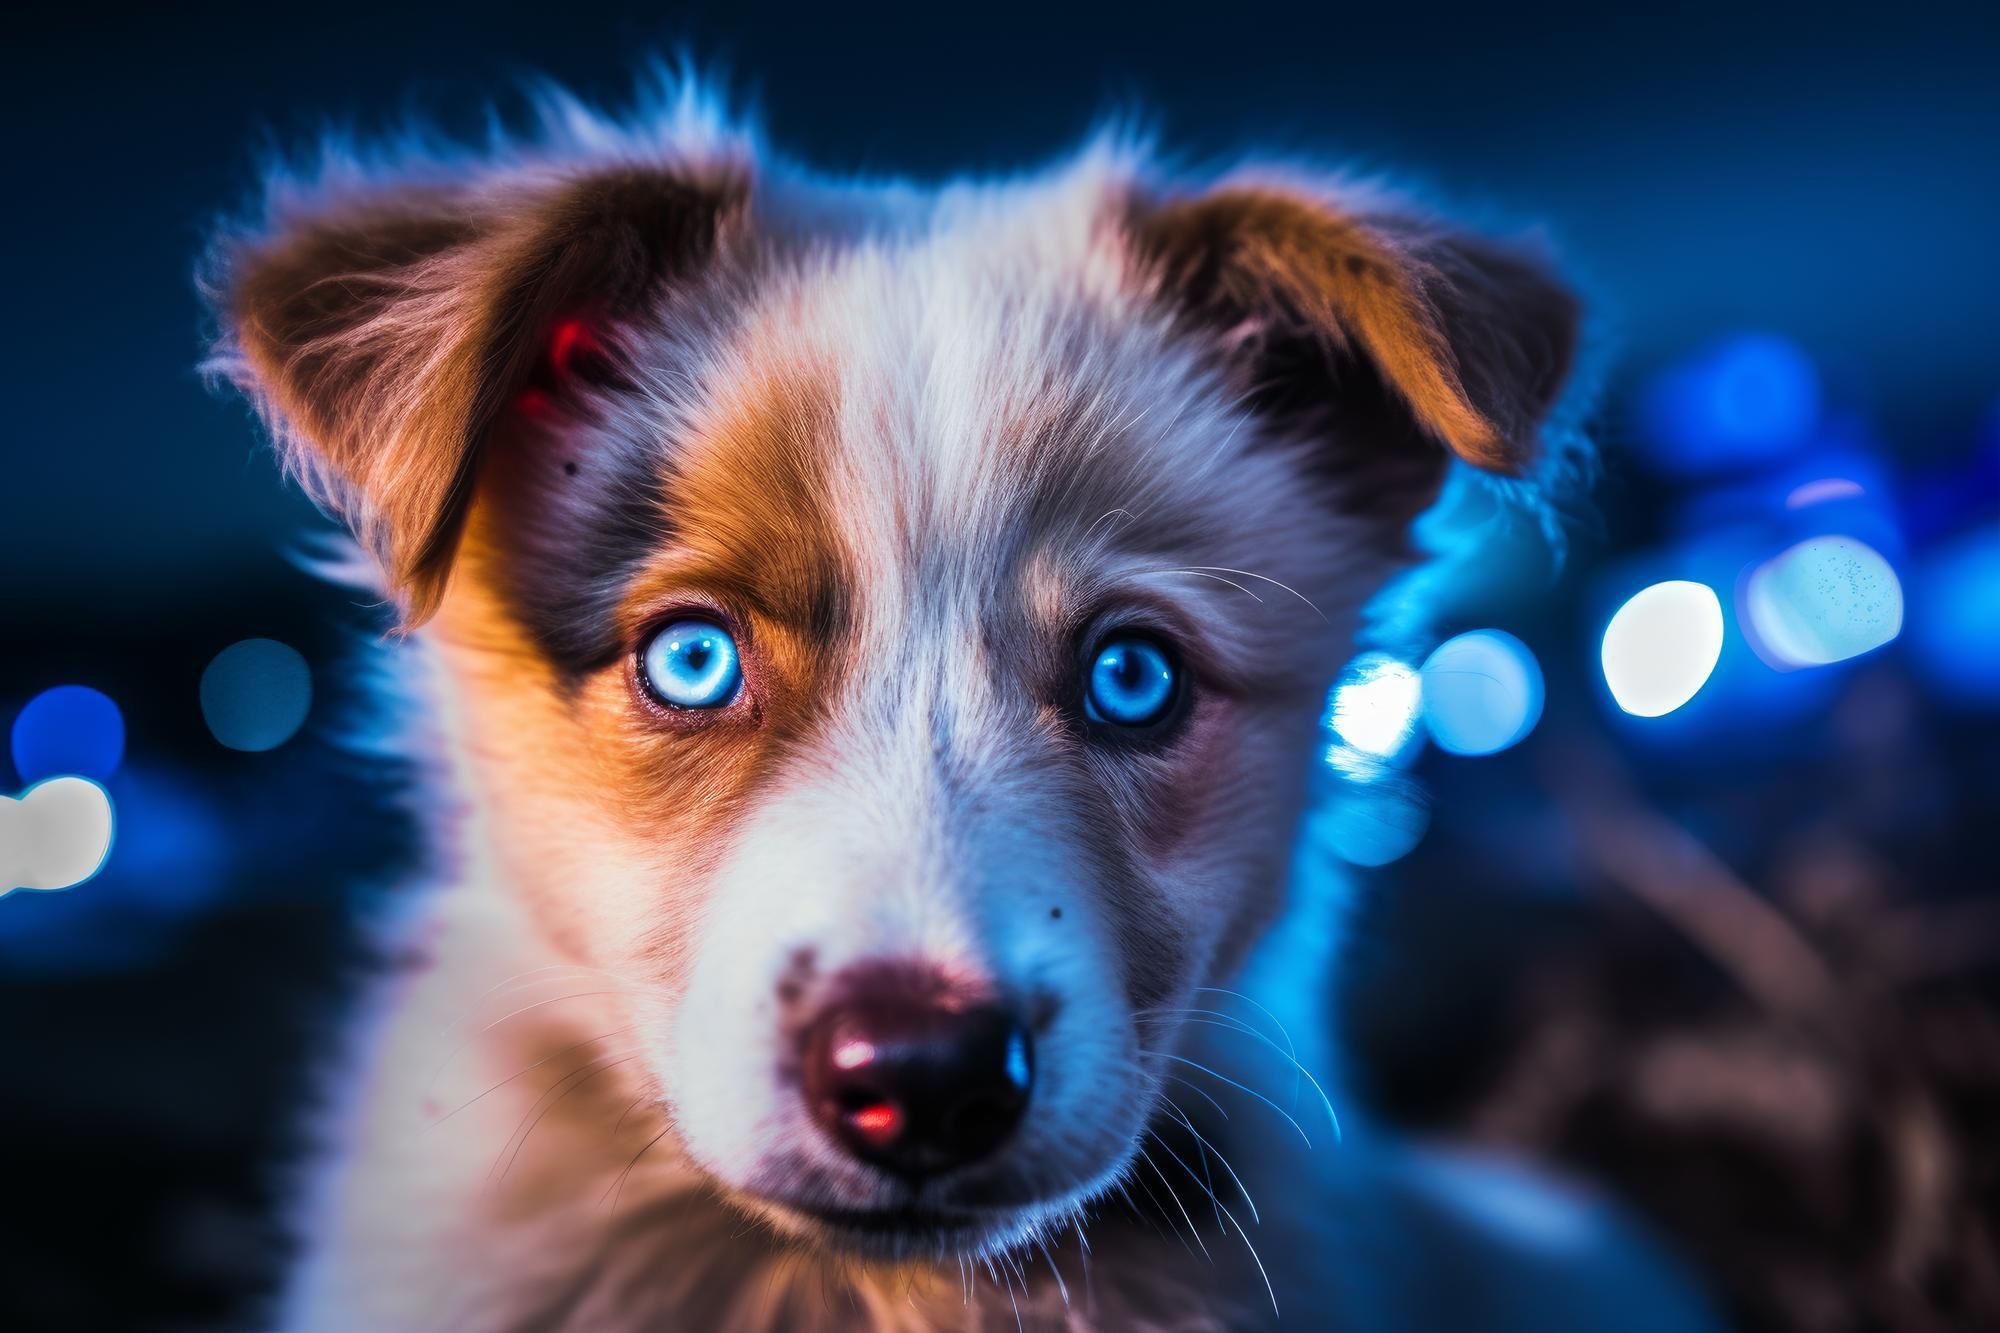 Why Do Dogs Eyes Glow in the Dark?